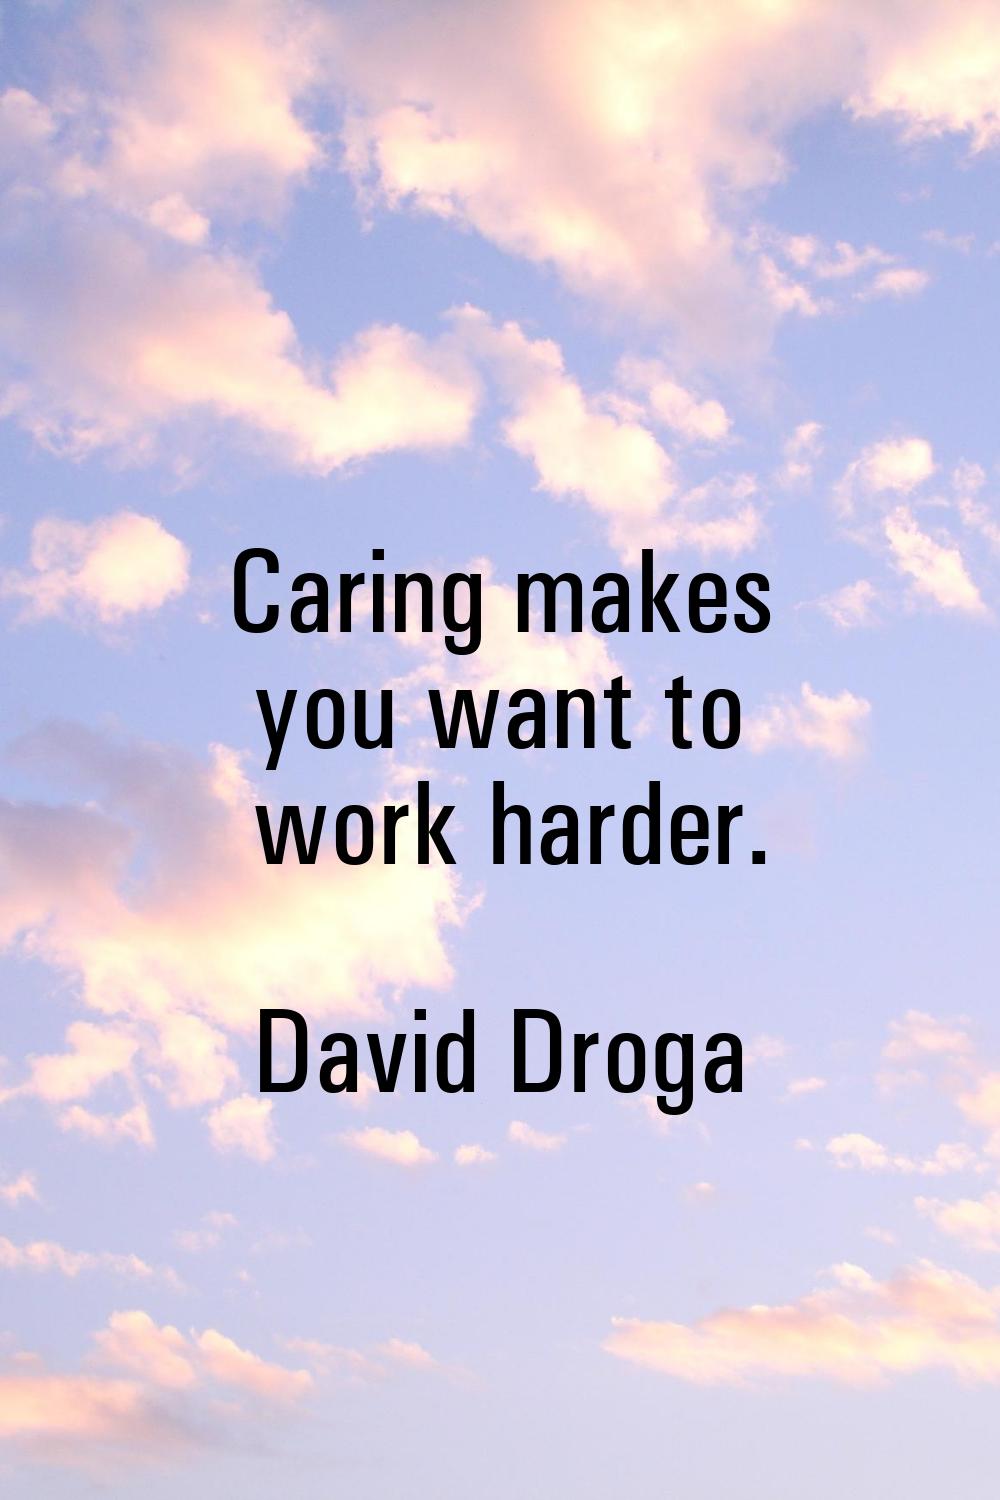 Caring makes you want to work harder.